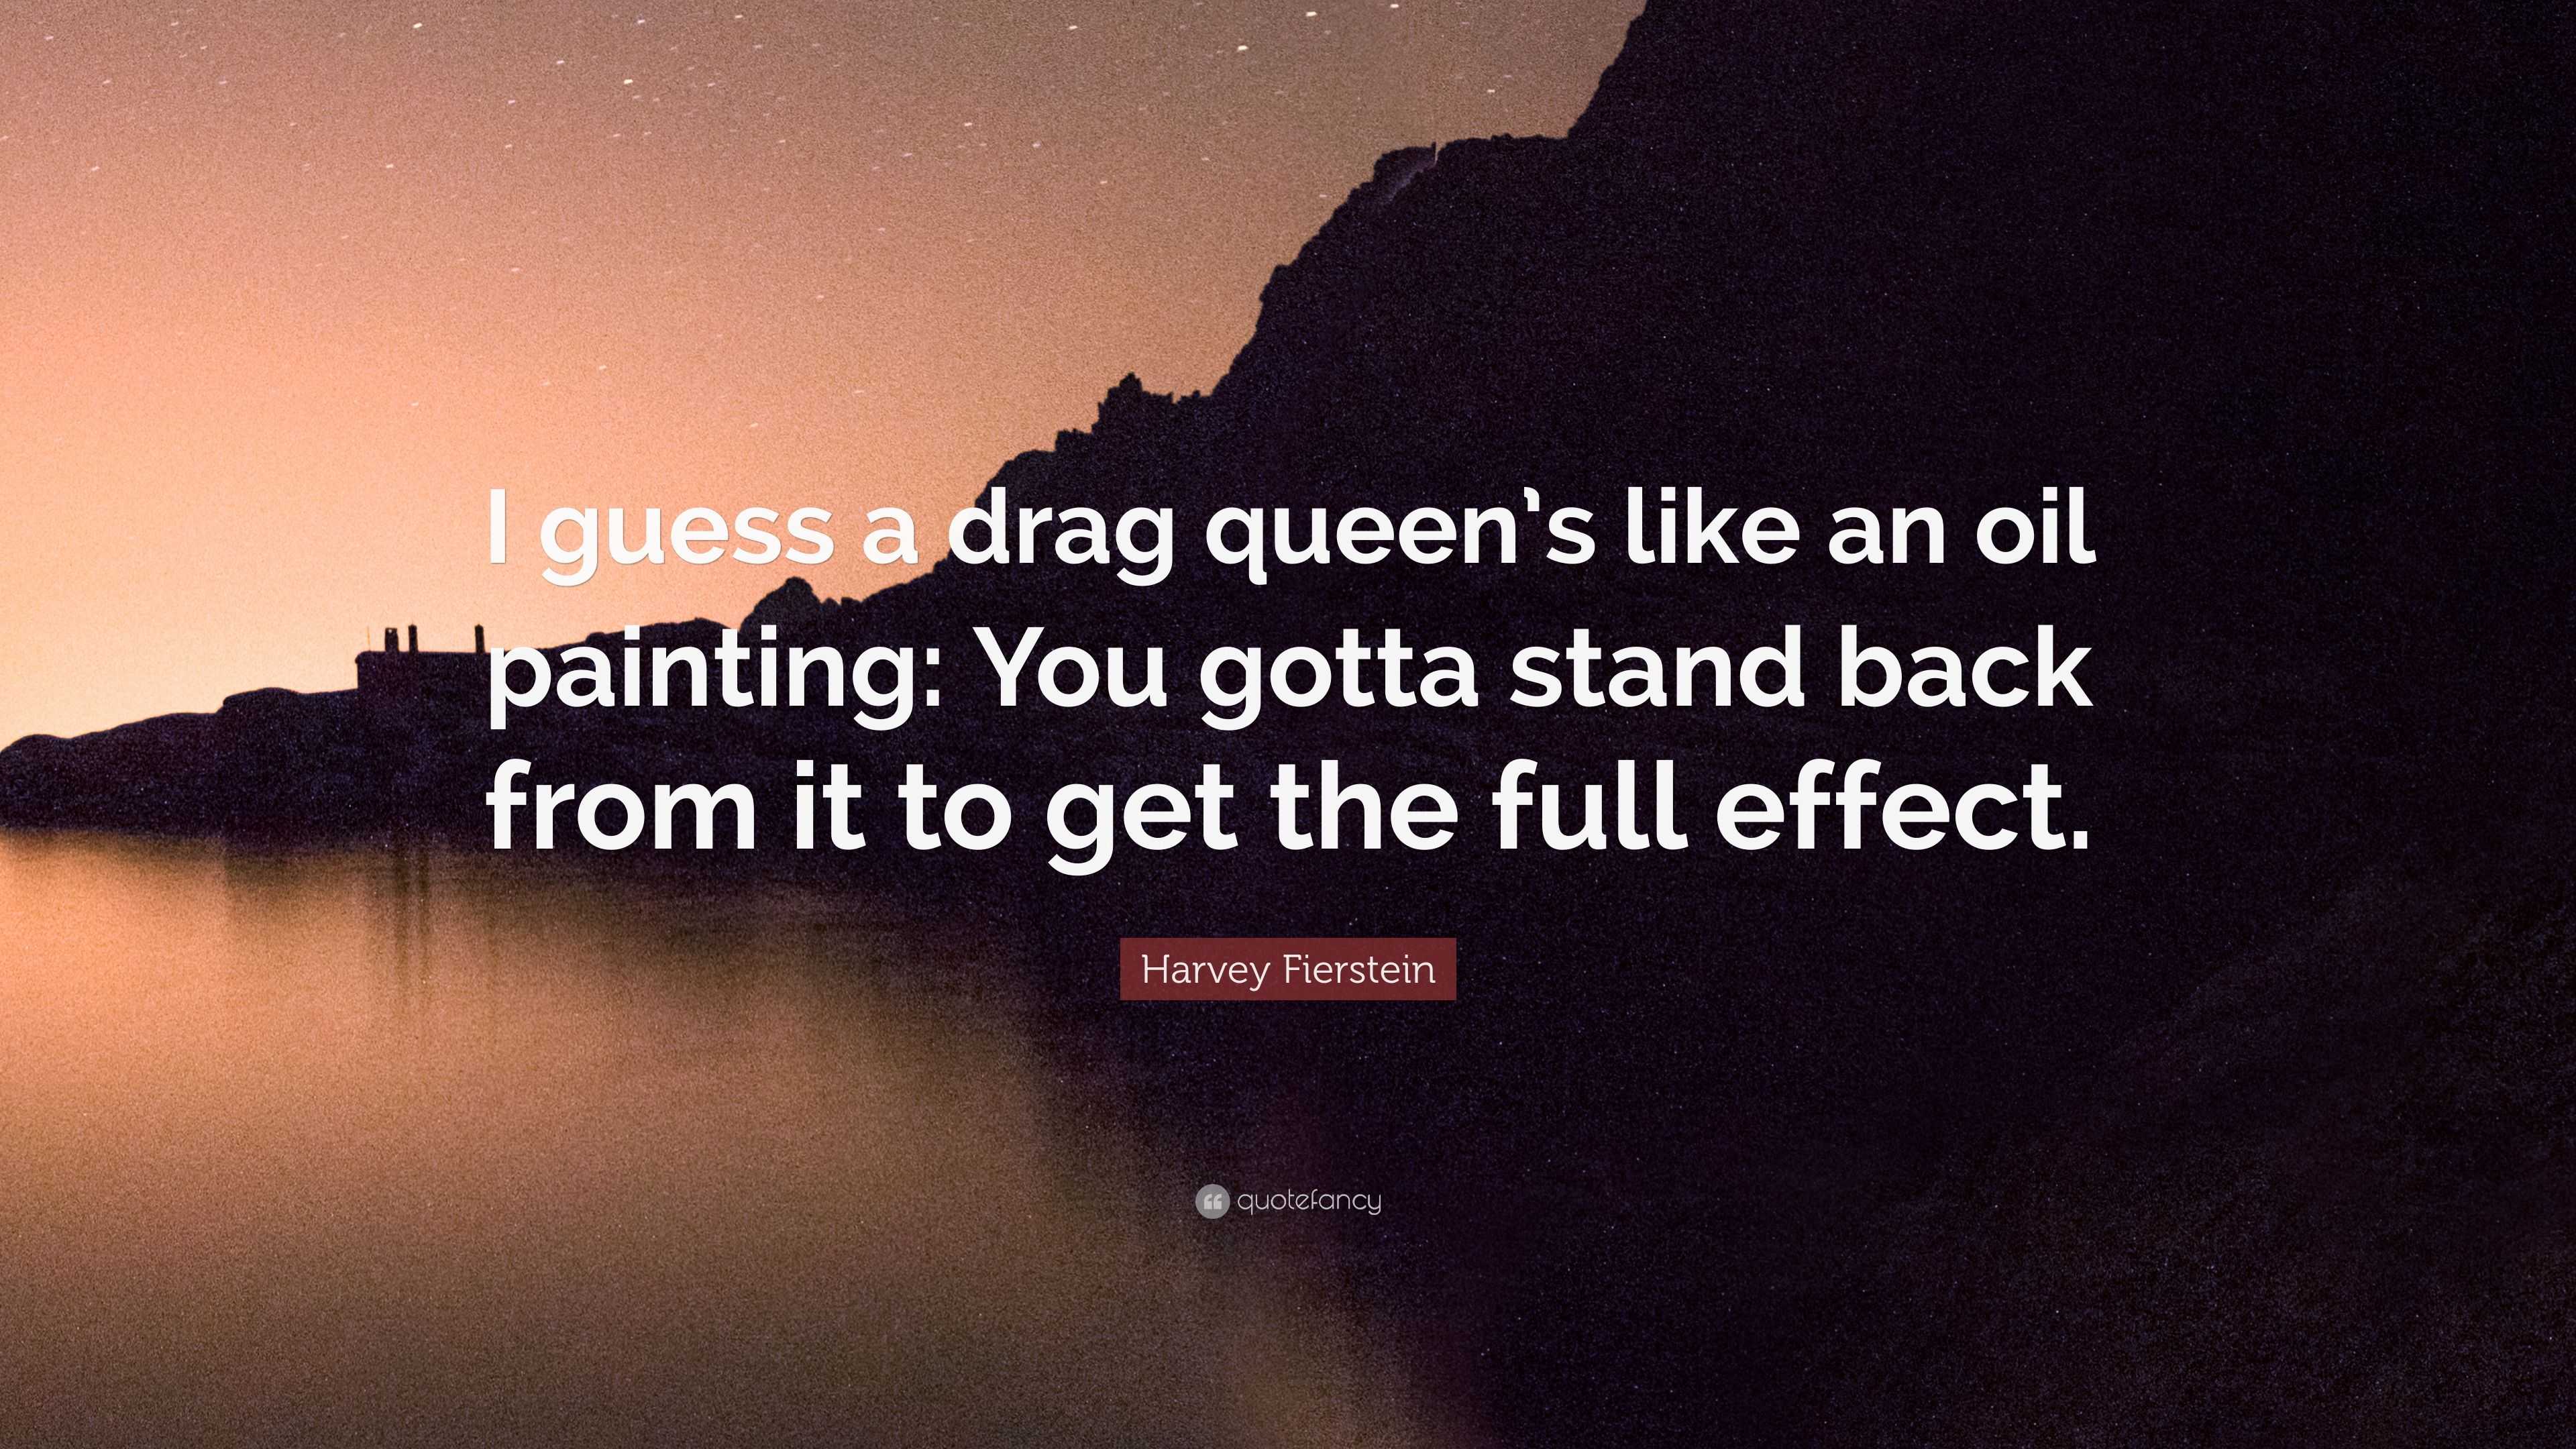 4336884 Harvey Fierstein Quote I guess a drag queen s like an oil painting